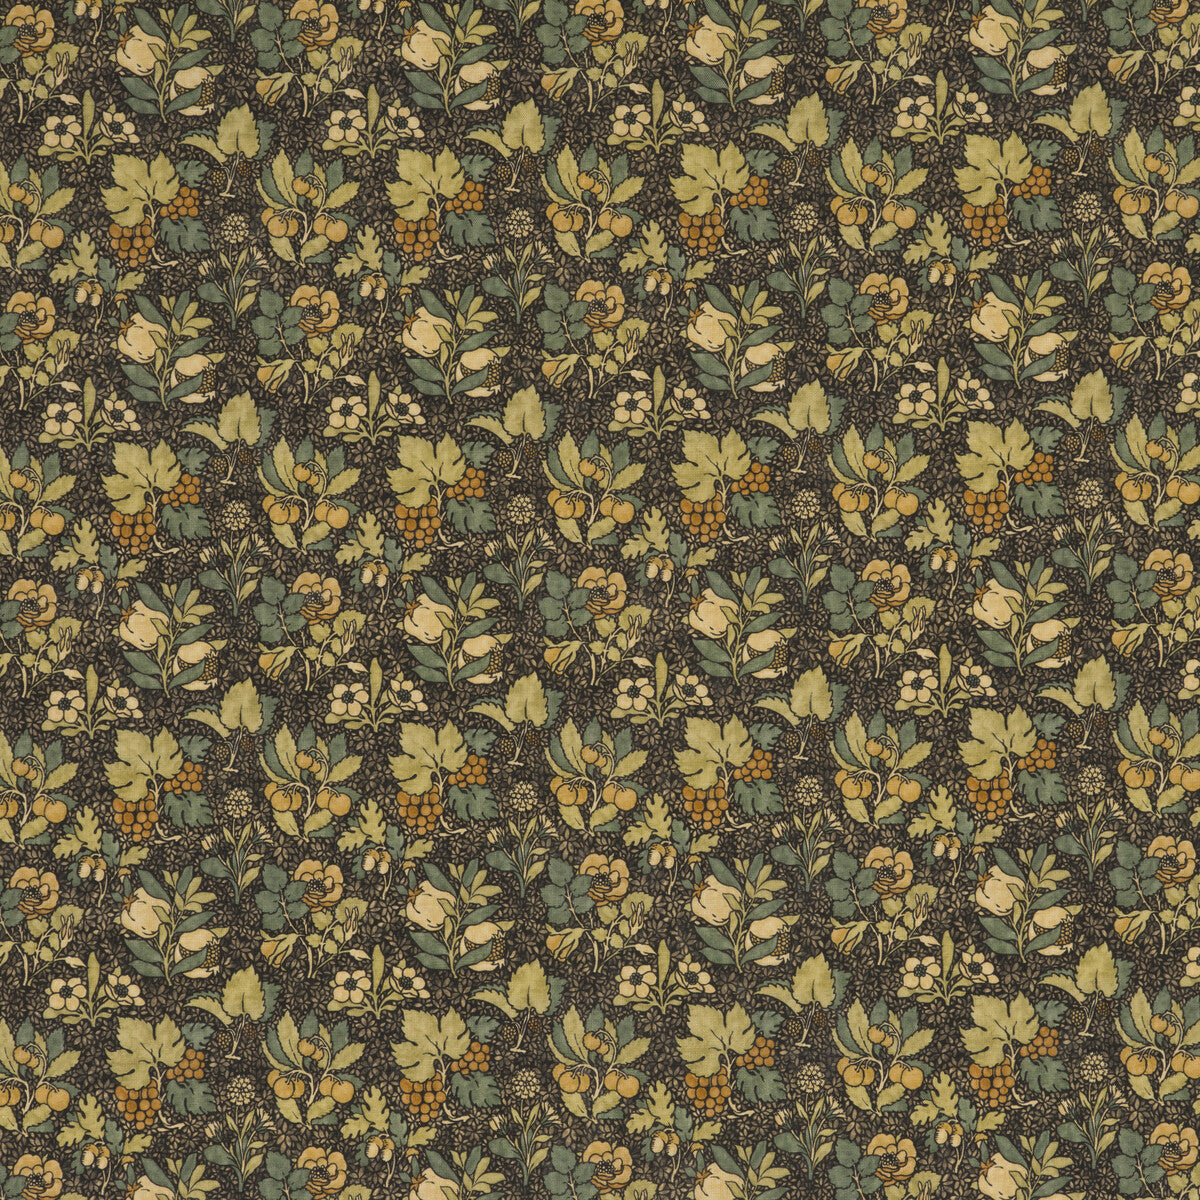 Meadow Fruit fabric in charcoal/green color - pattern BP10619.3.0 - by G P &amp; J Baker in the Originals V collection